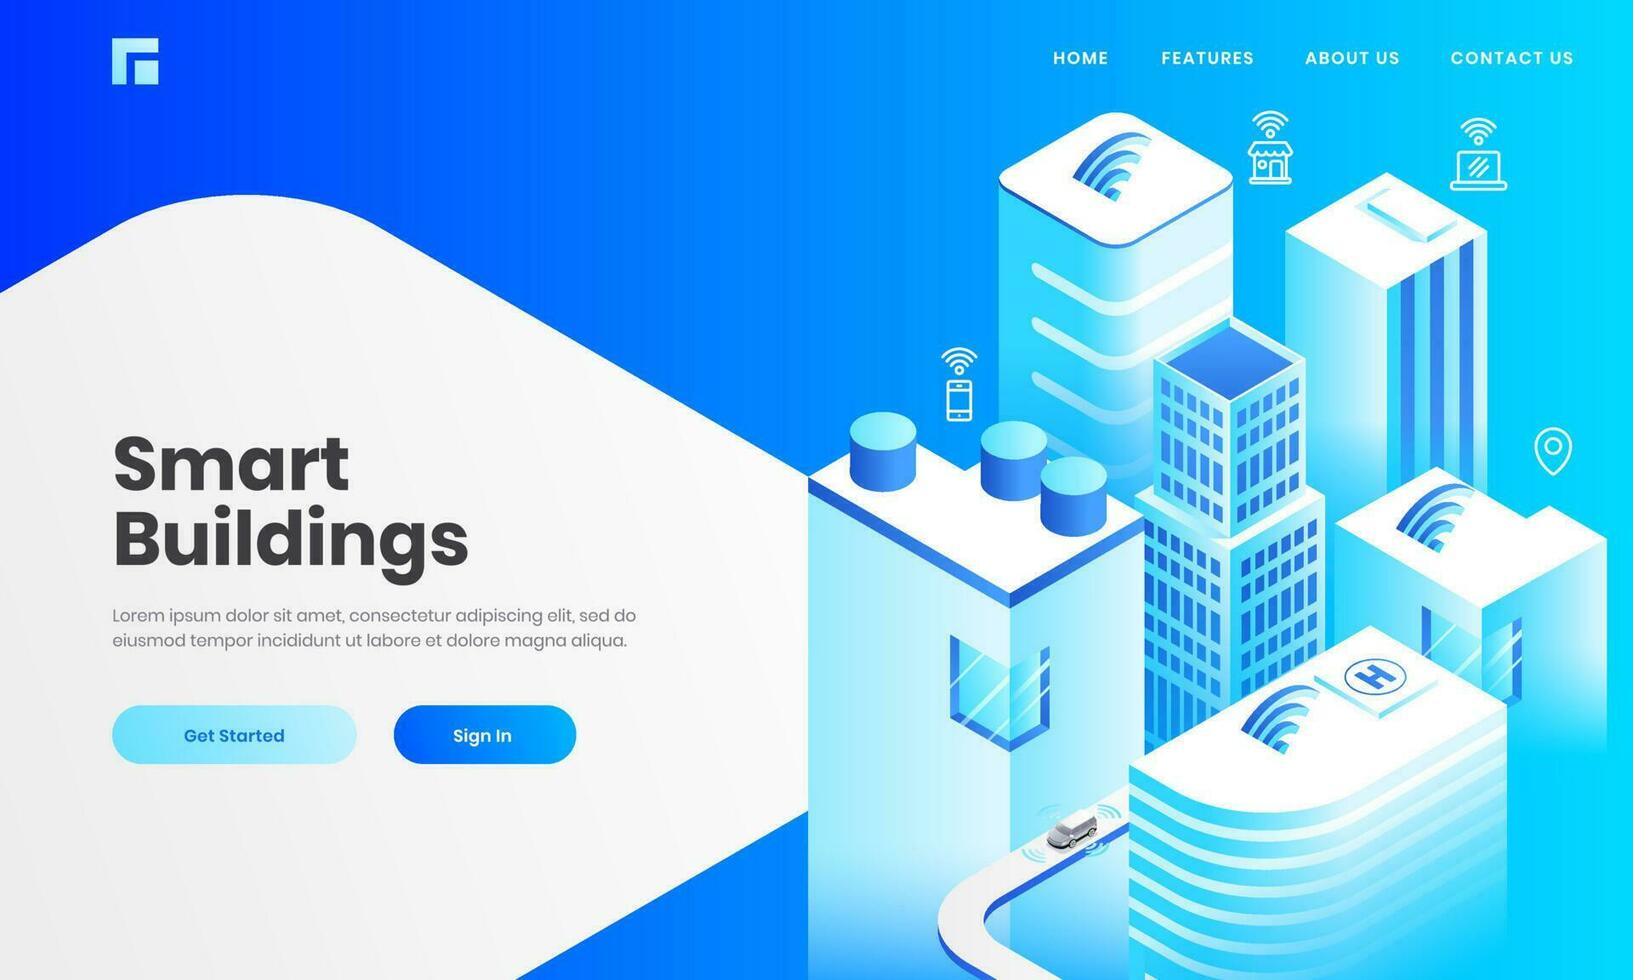 Isometric view of skyscraper buildings with technology devices through internet network for Smart Building concept based landing page design. vector